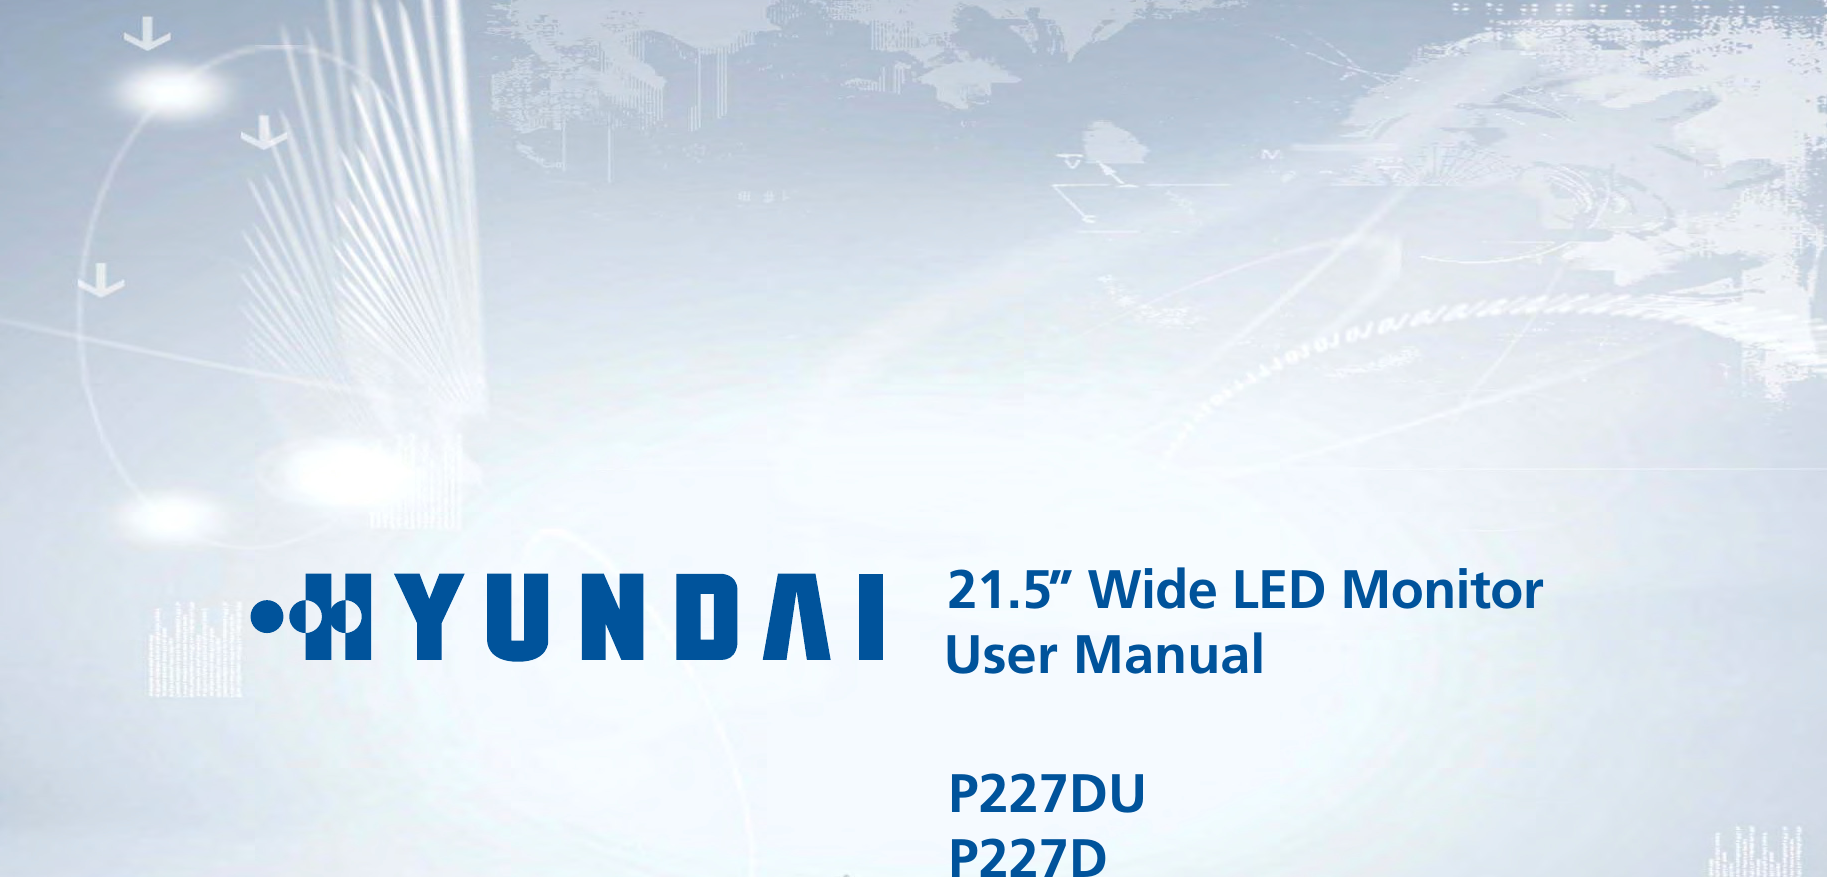 21.5” Wide LED Monitor User Manual P227DUP227D